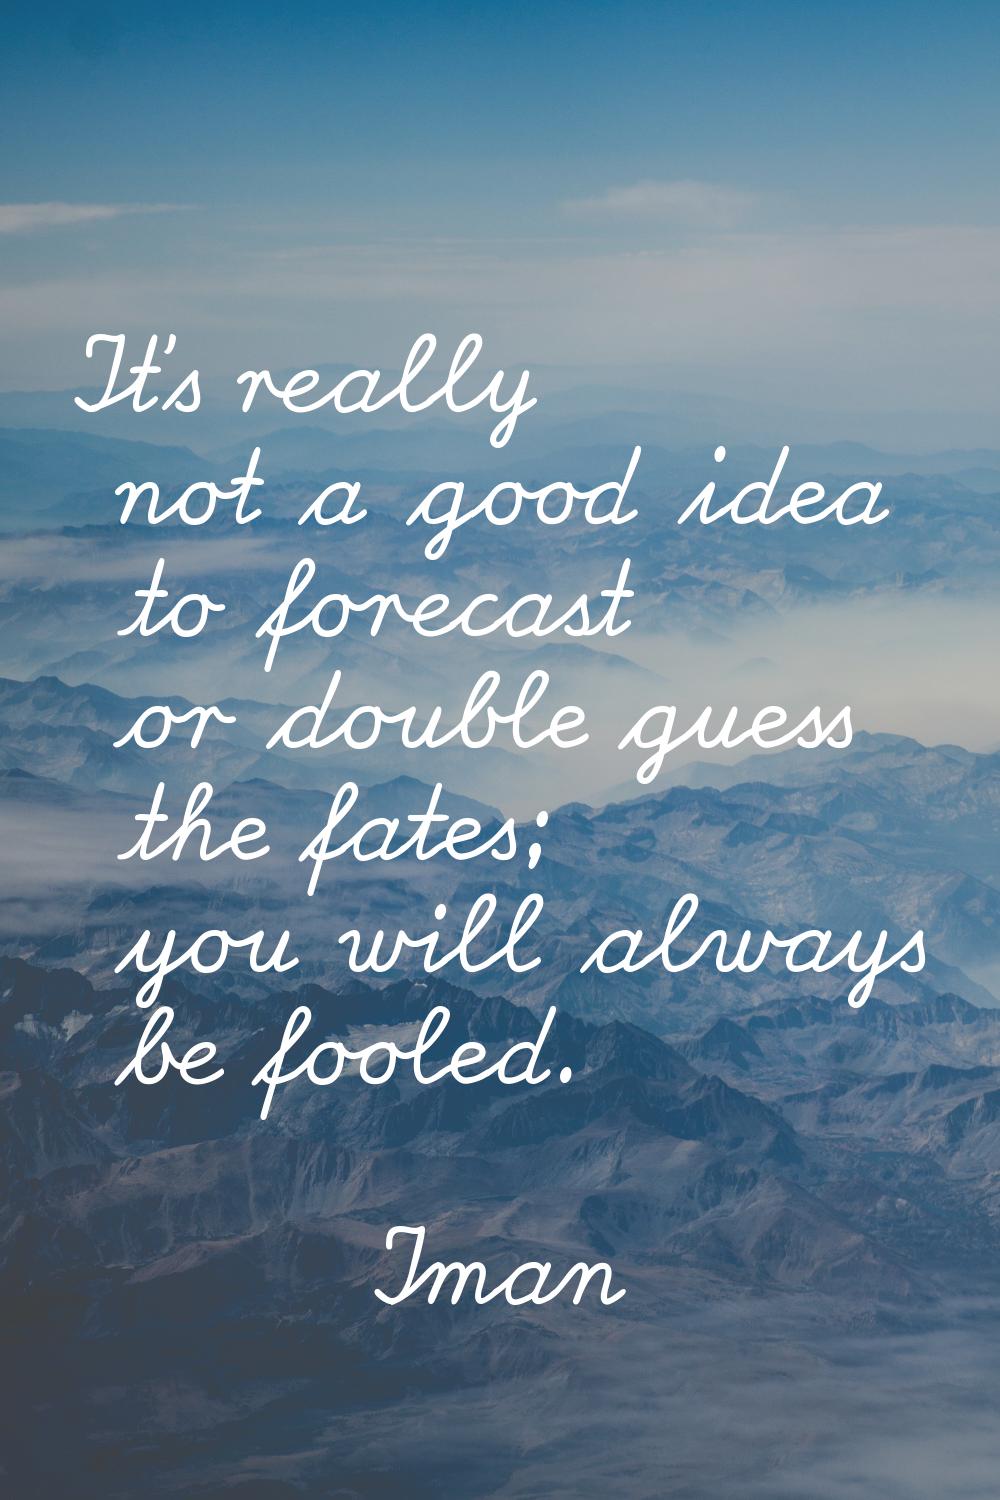 It's really not a good idea to forecast or double guess the fates; you will always be fooled.